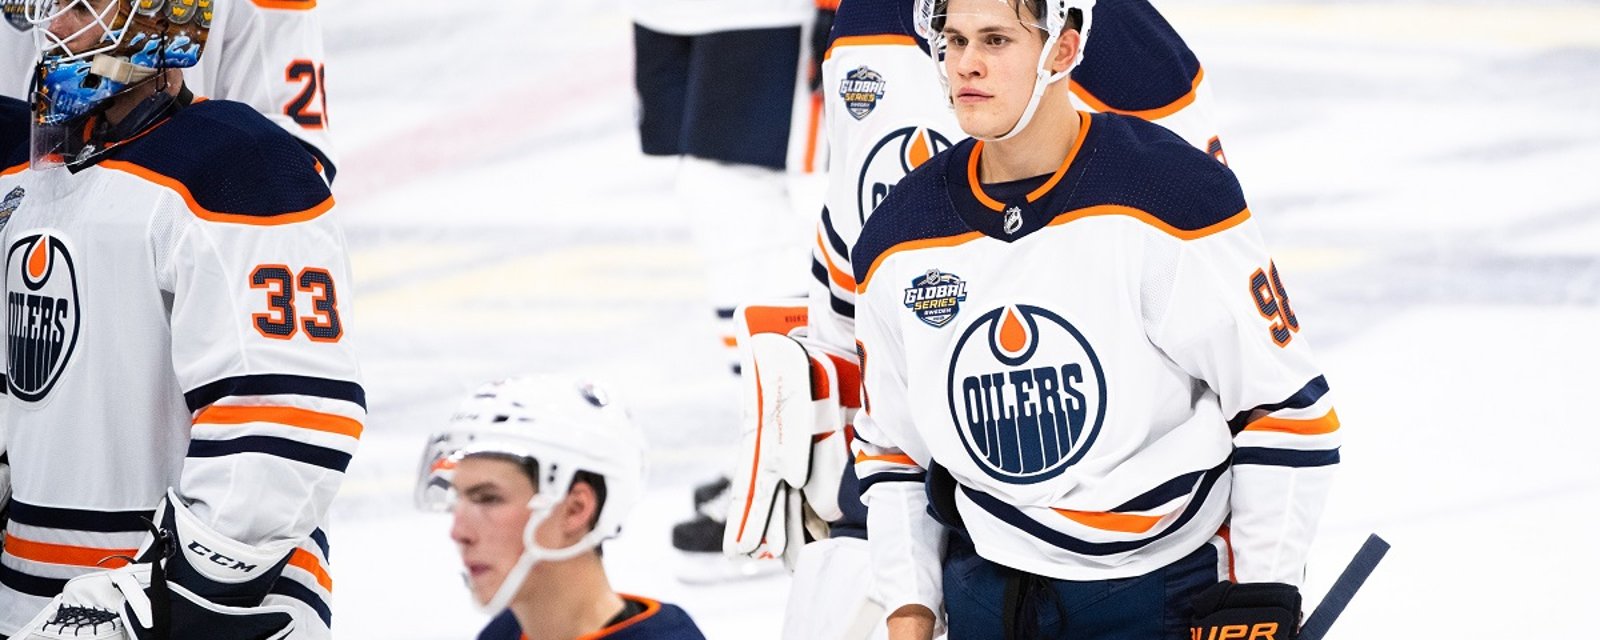 Oilers forward appears to demand a trade.